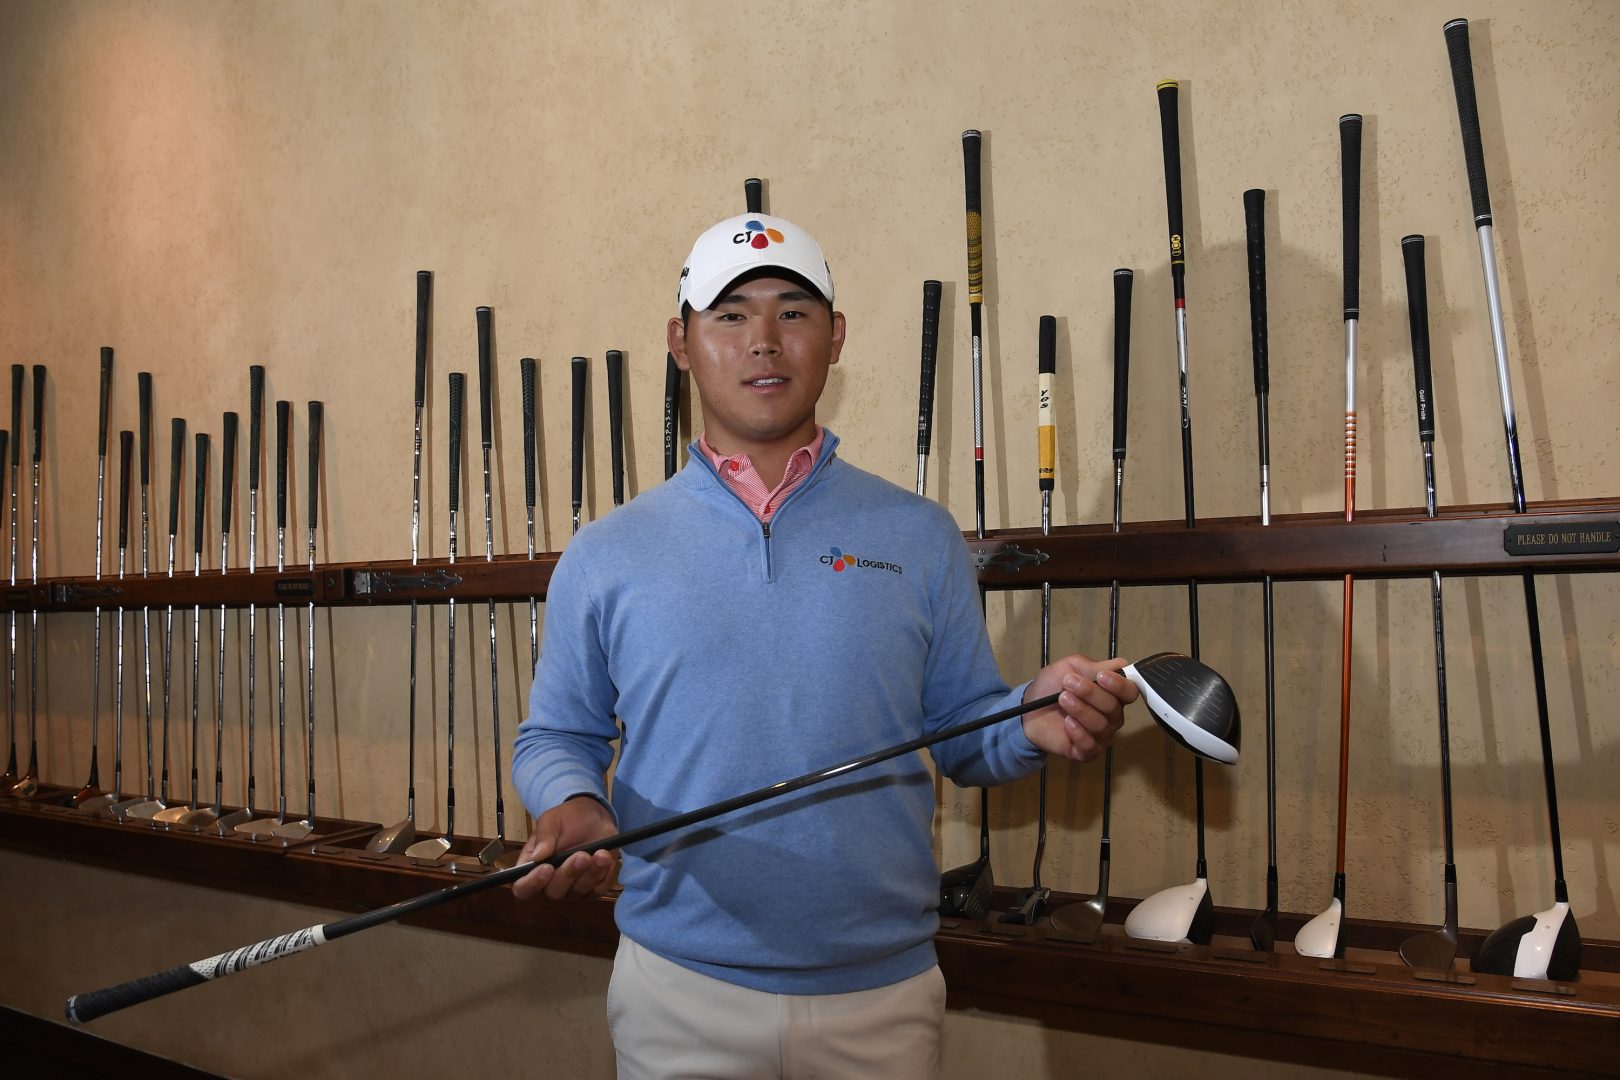 PONTE_VEDRA_BEACH_FL _MARCH_12: 2017_Defending_Champion_Si_Woo_Kim_of_South_Korea_donates_his_driver_to_the_clubhouse_collection_during_THE_PLAYERS_Media_Day_TPC_Sawgrass_on_March_12_2018_in_Ponte_Vedra_Beach_Florida_(Photo_by_Chris_Condon/PGA_TOUR)